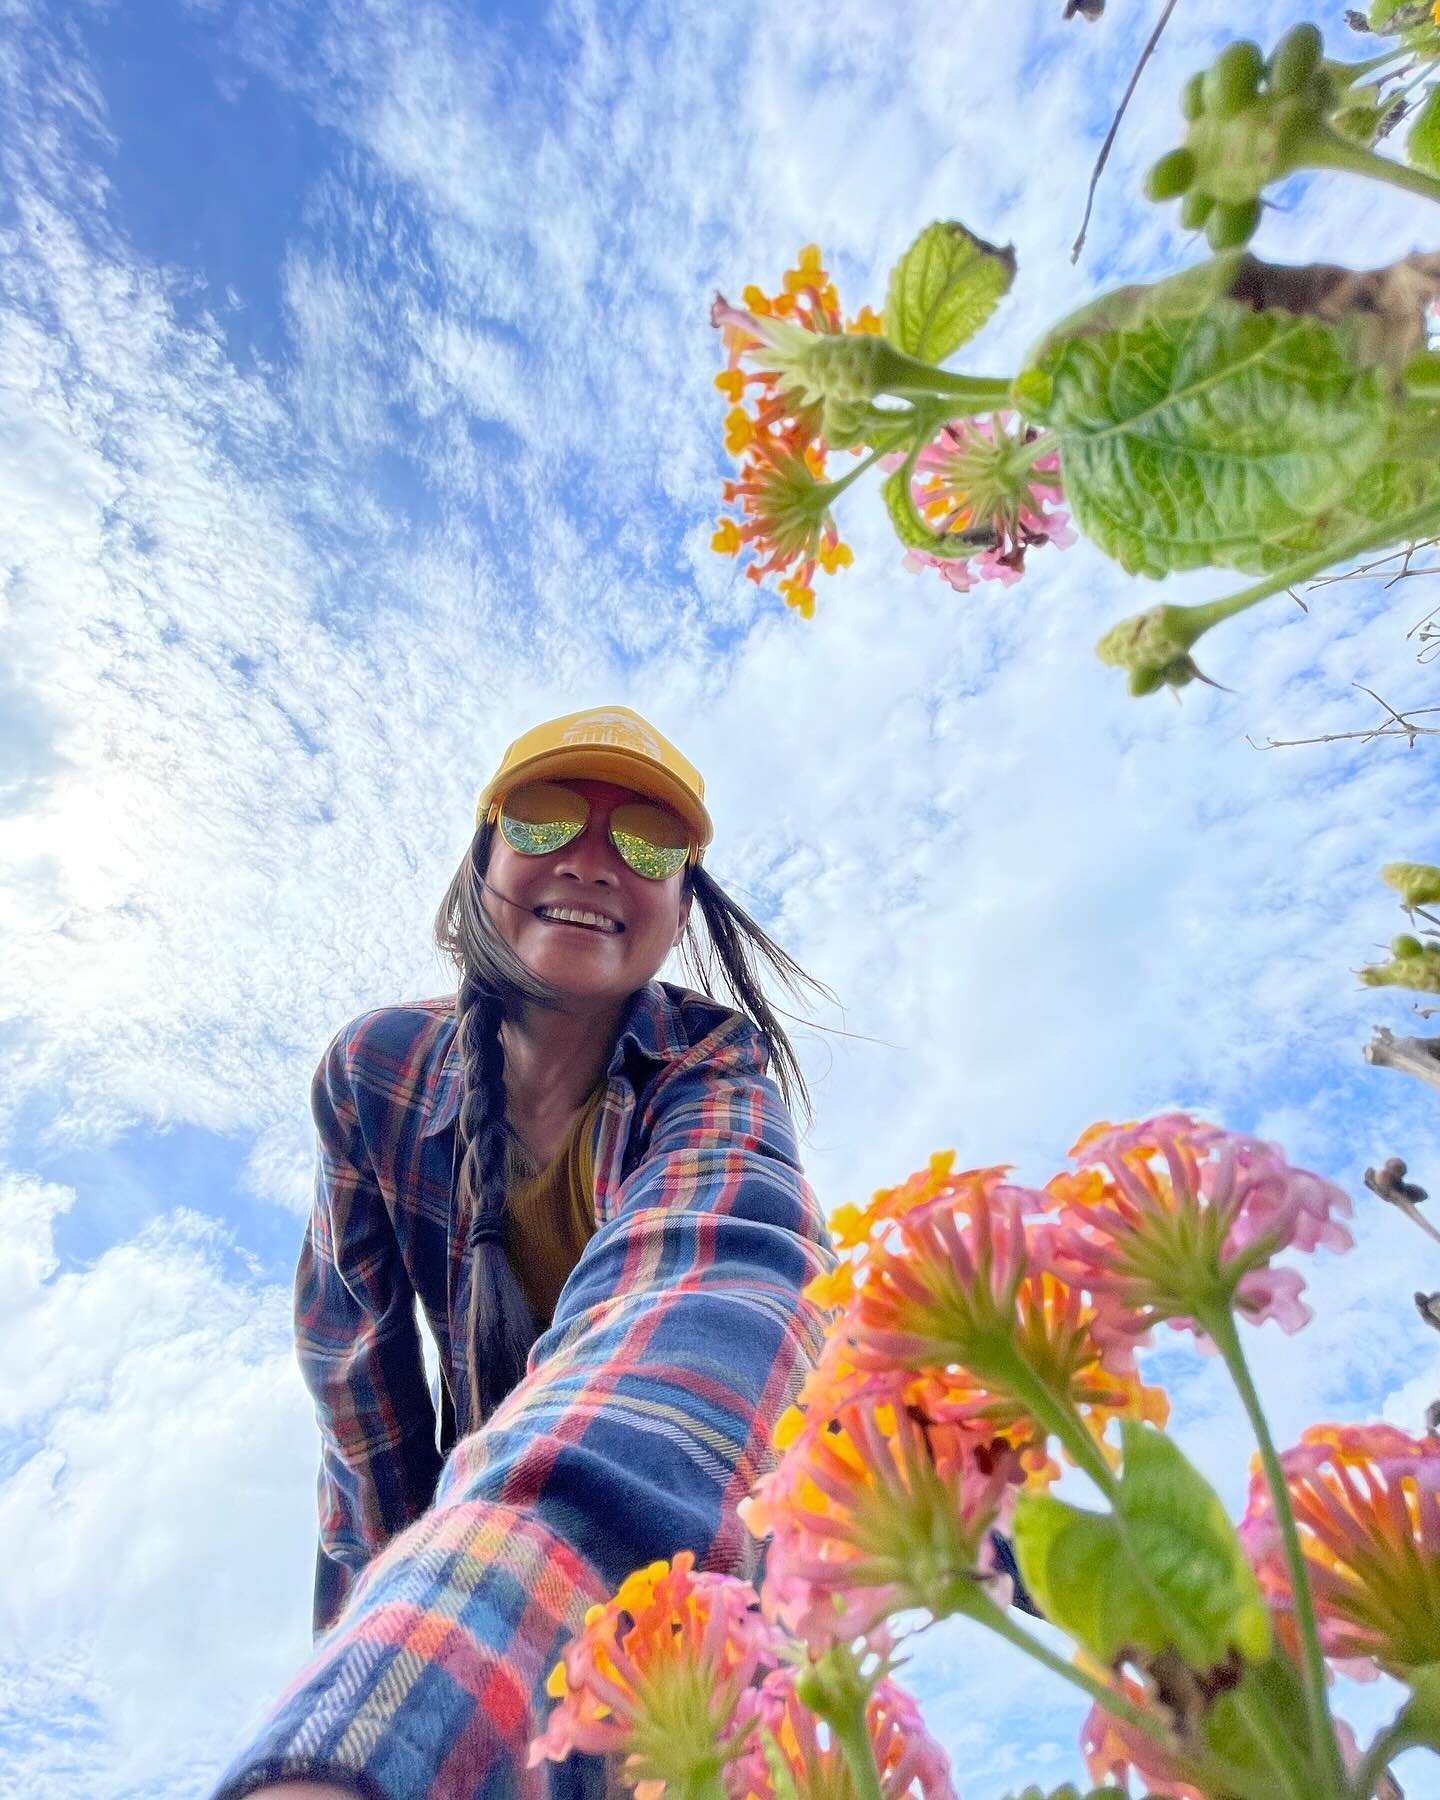 🌺☀️A reminder that joy and grief can coexist&hellip;it&rsquo;s been both a fun and hard start to April💛

Some pics from visiting family in Hawaii and exploring the Big Island a couple weeks ago🙂

💐Smiles and flower selfie

☀️A different kind of w